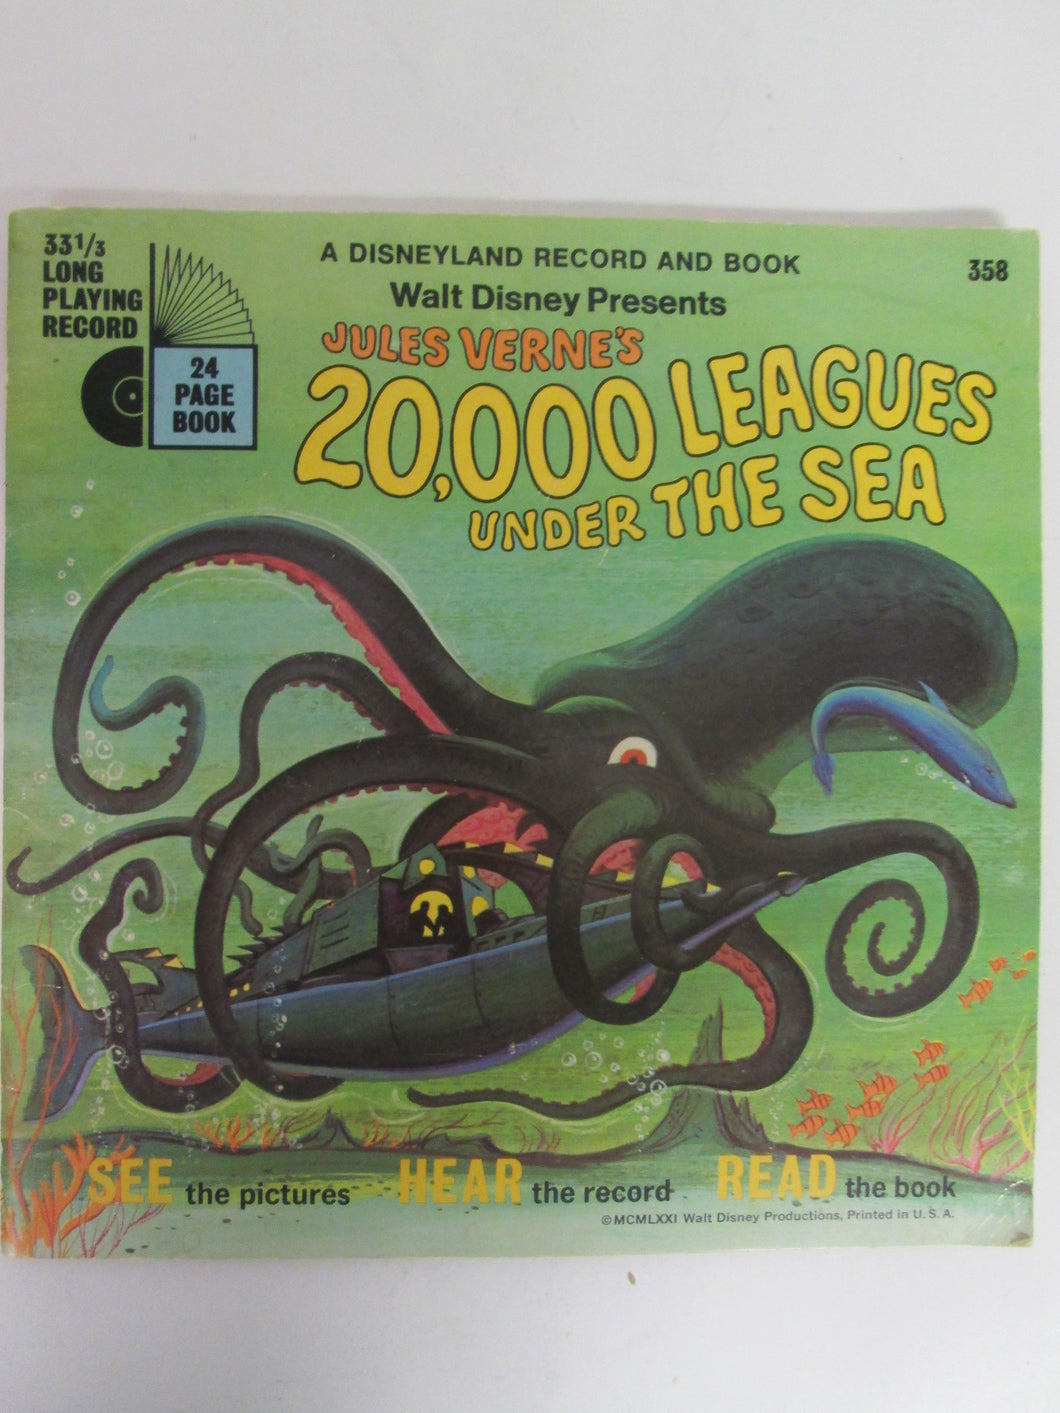 20,000 Leagues Under The Sea A Disneyland Book and Record #358 33 1/3 RPM (1971)